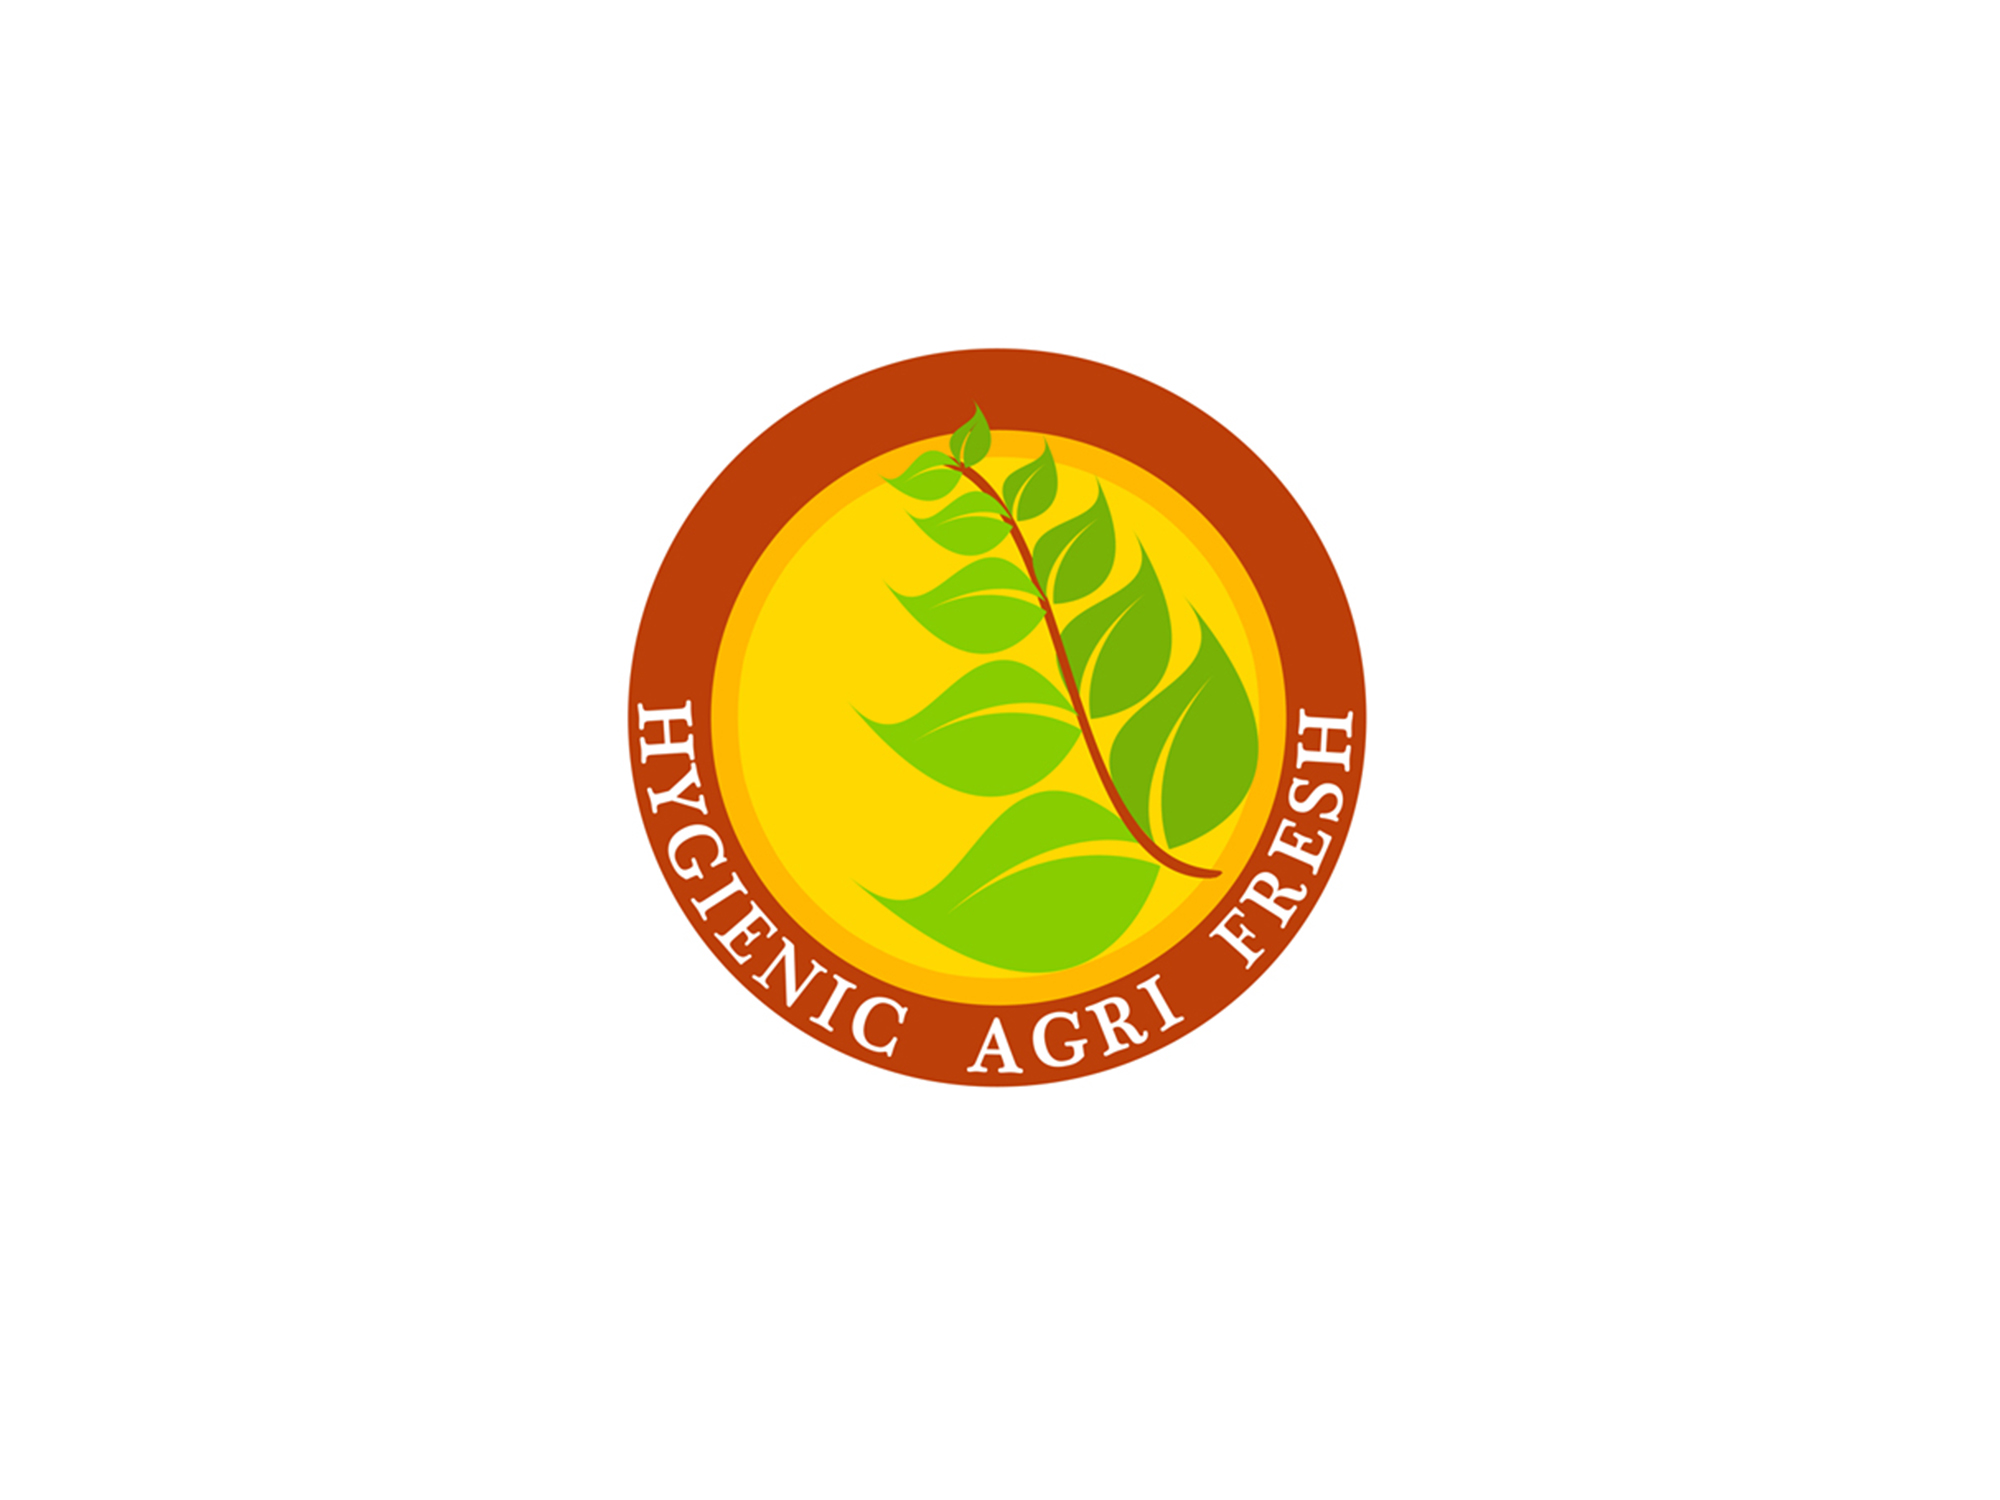 Hygenic Agri - XpertLab Technologies Private Limited